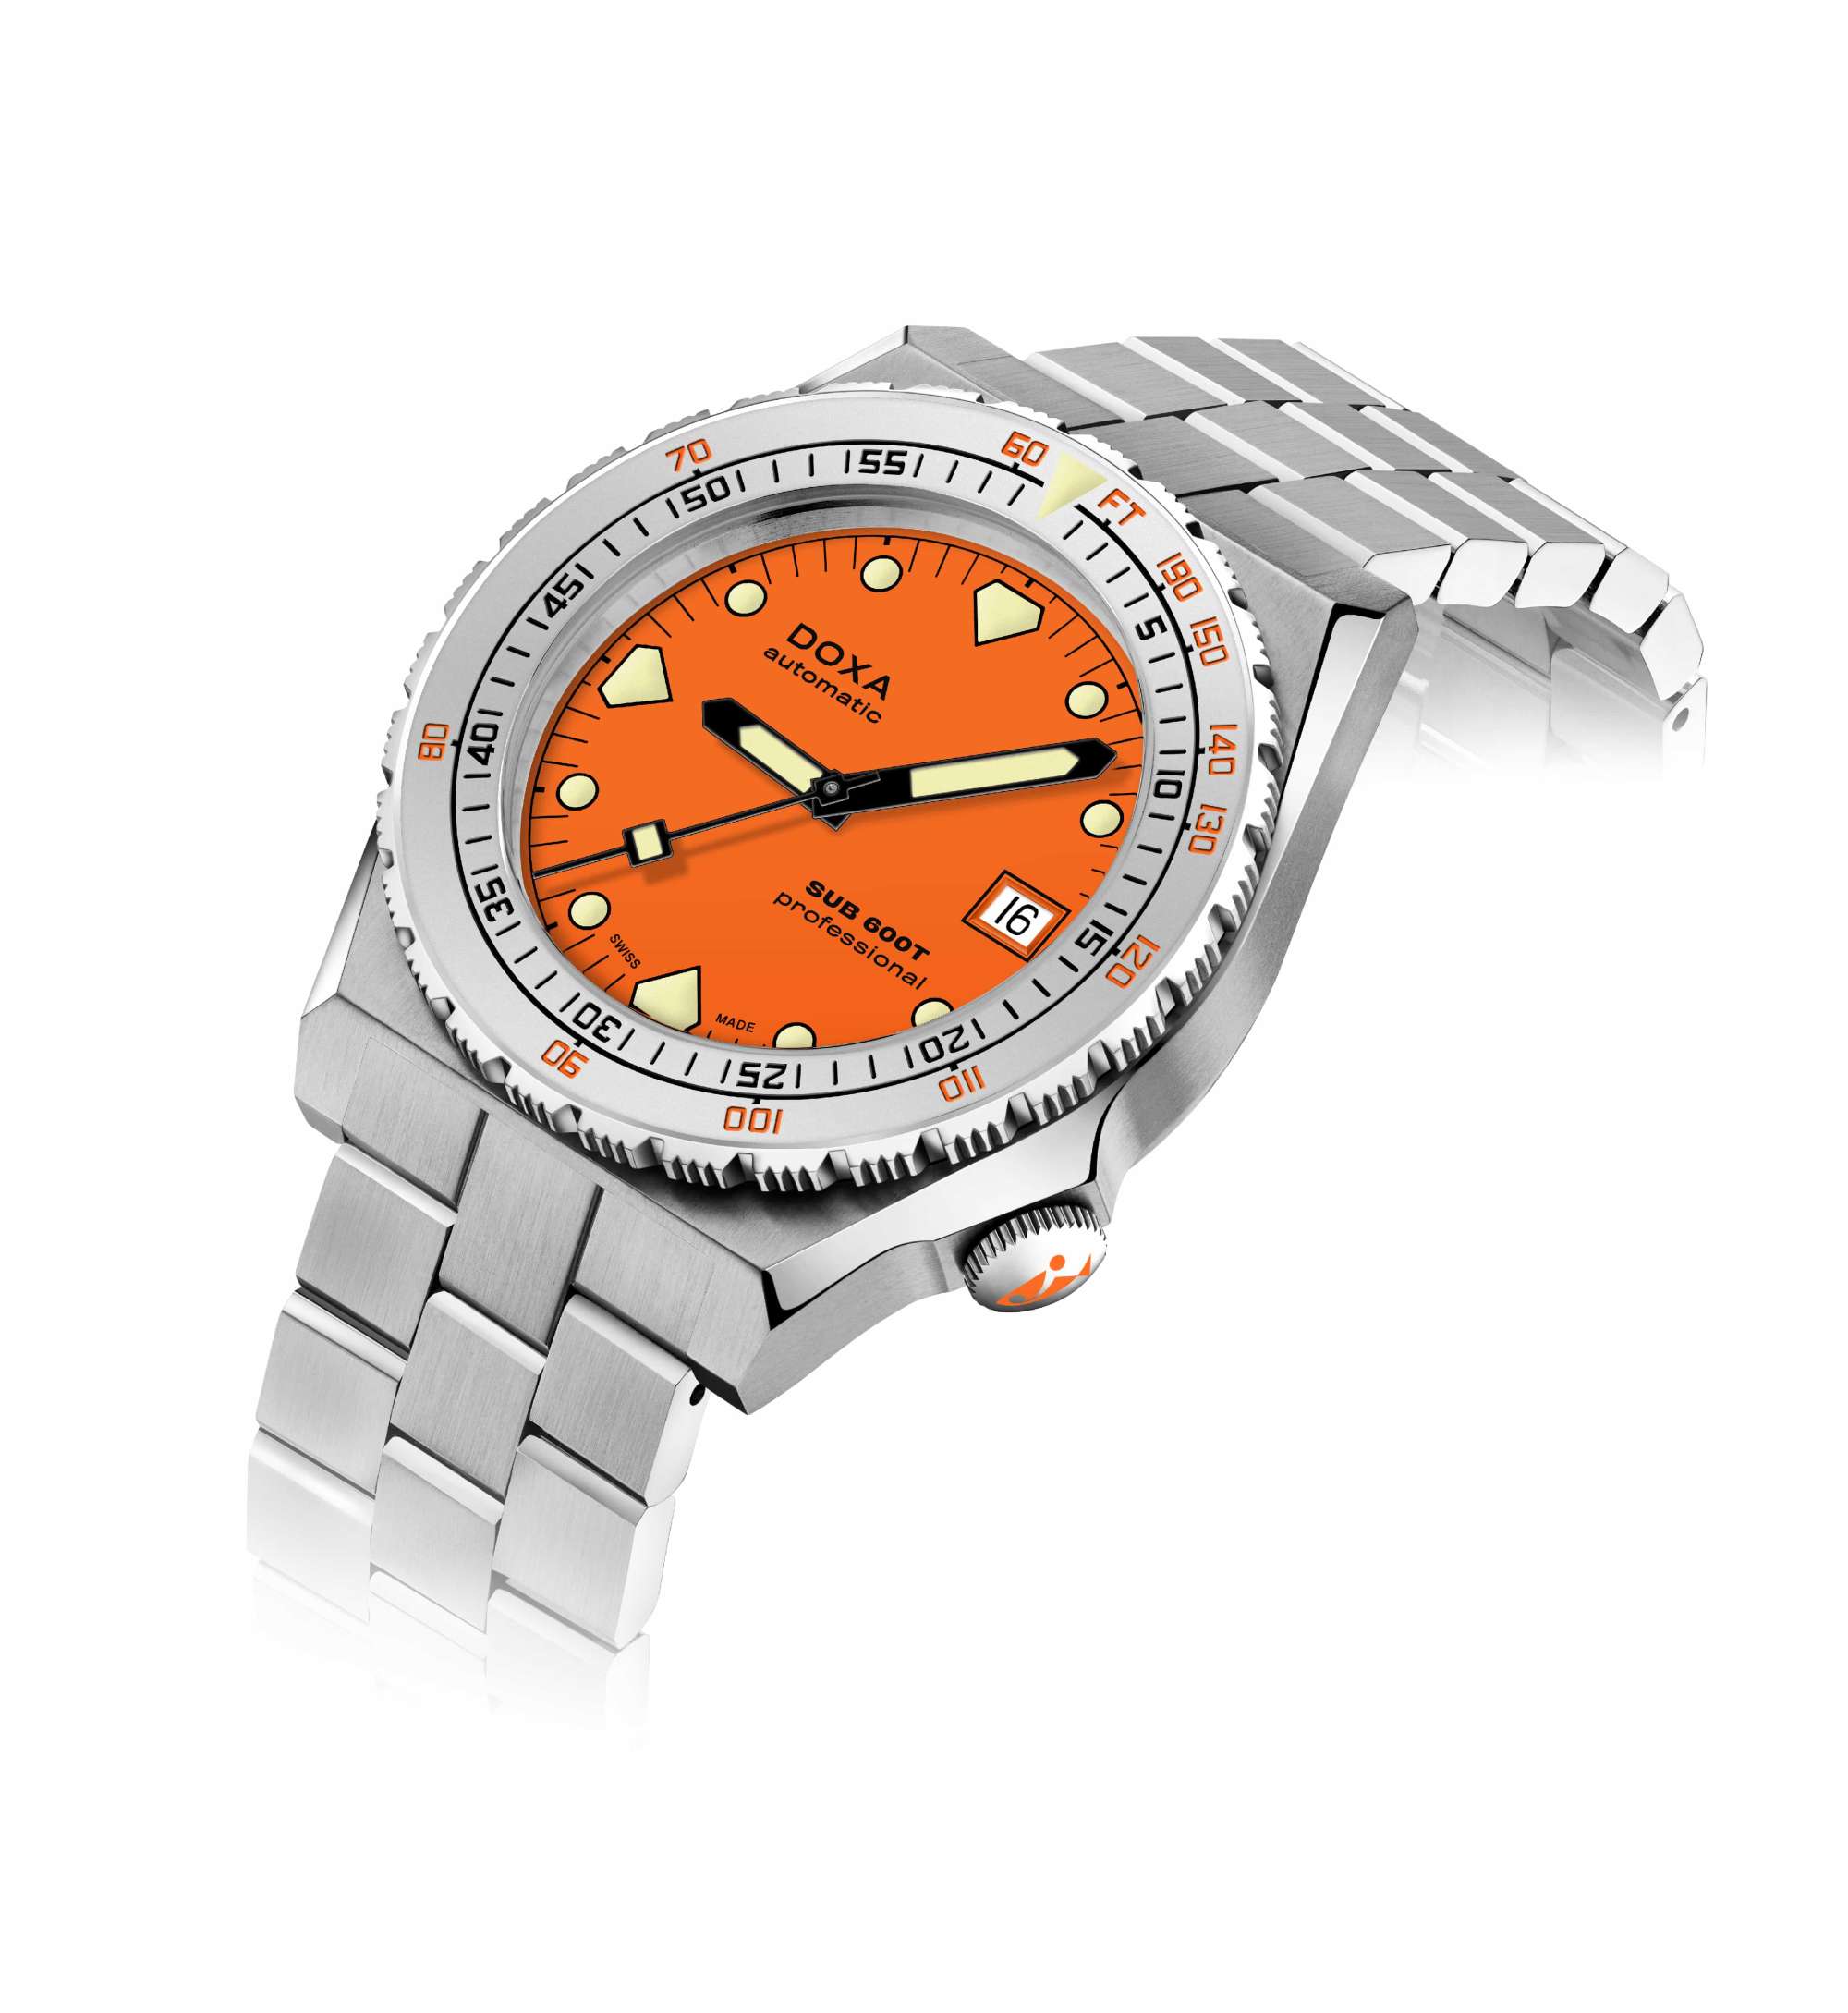 DOXA SUB 600T Professional Stainless Steel 862-10-351-10 – Swiss Time